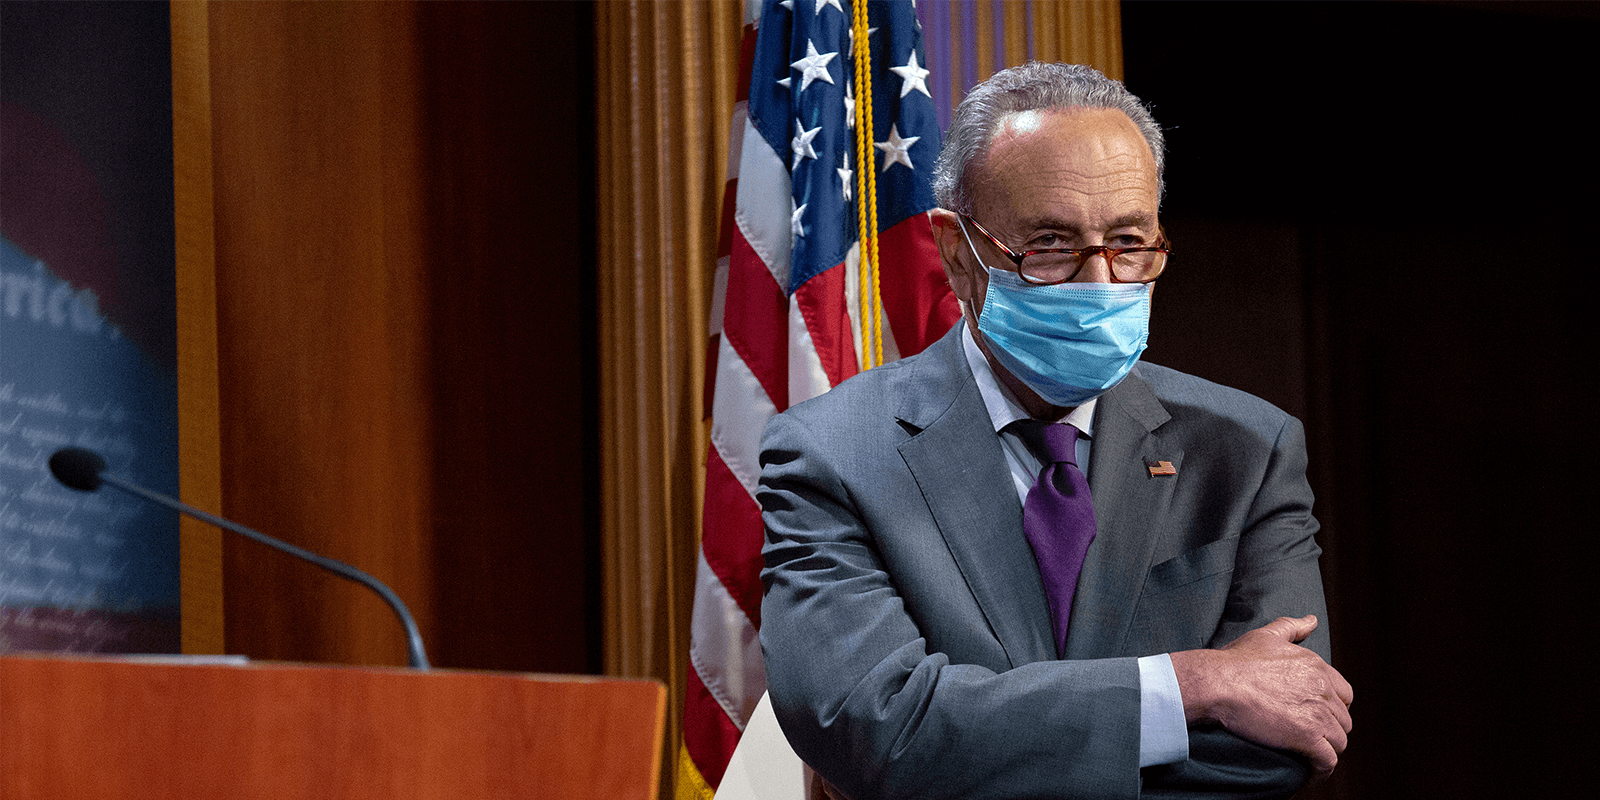 Schumer joins AFSCME in calling for at least $1 trillion in federal aid to states, cities and towns